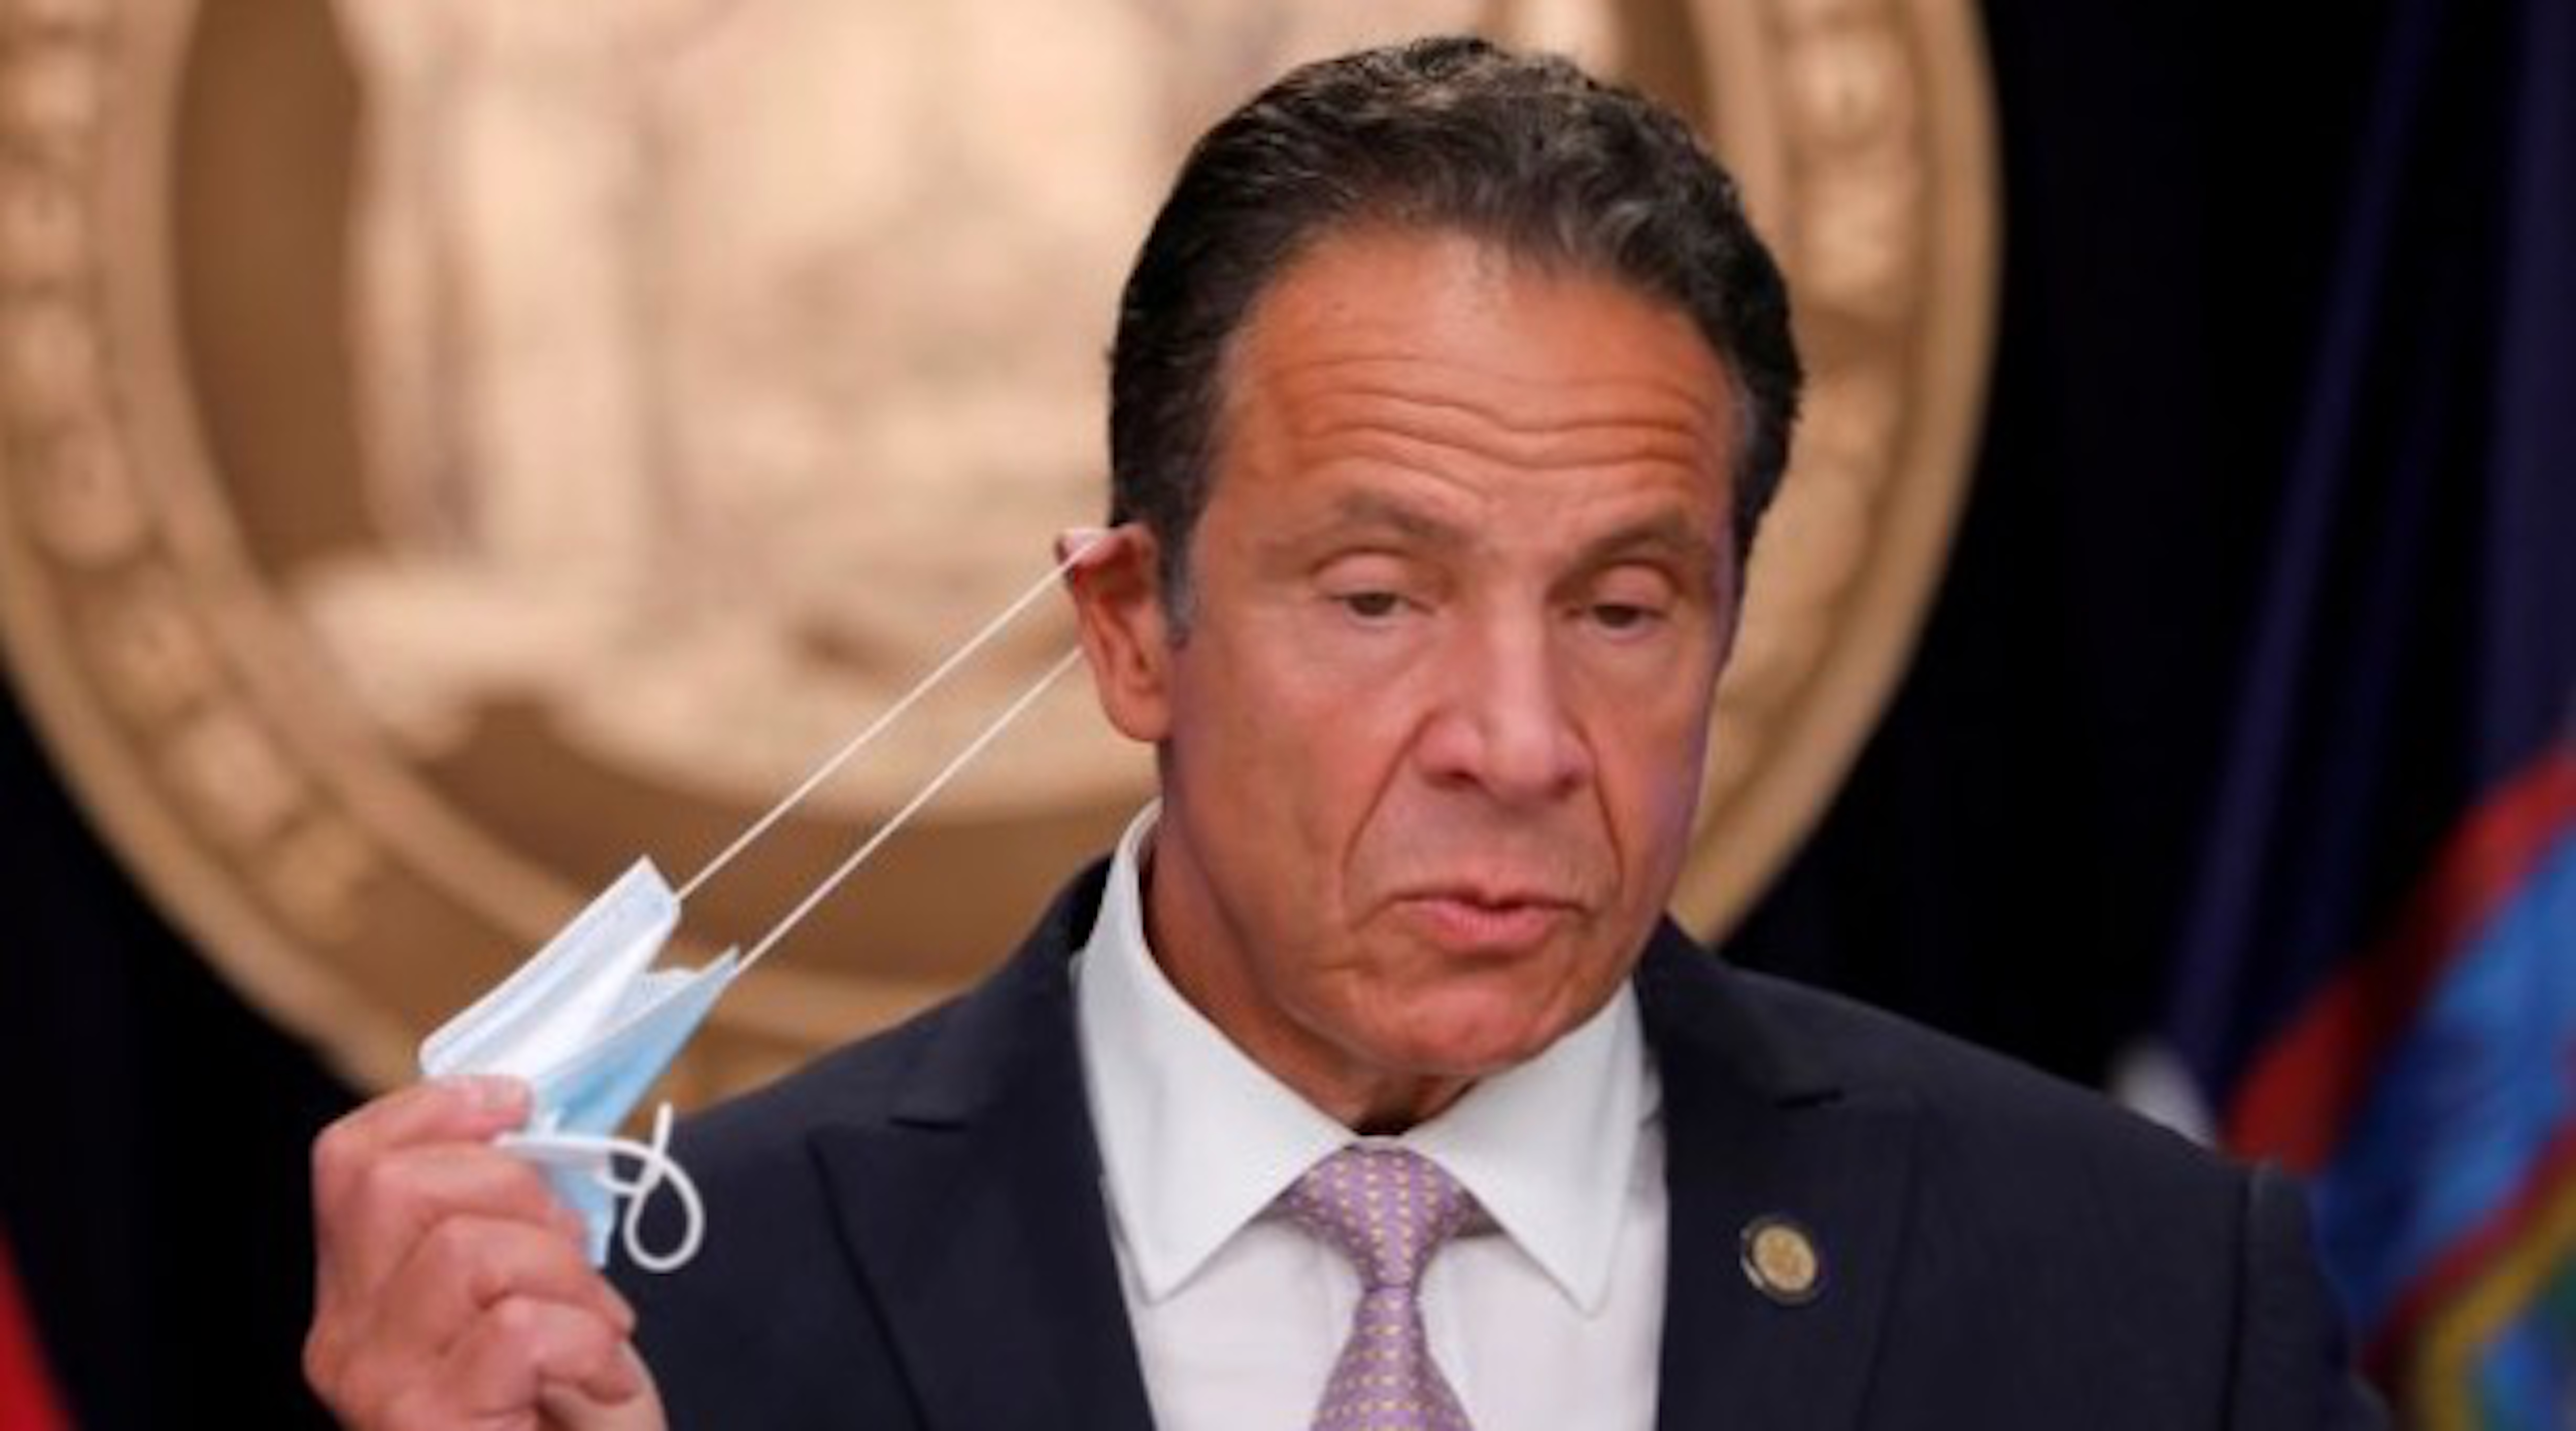 Cuomo Wins an Emmy for Being an Effective Weapon of Corporate Power